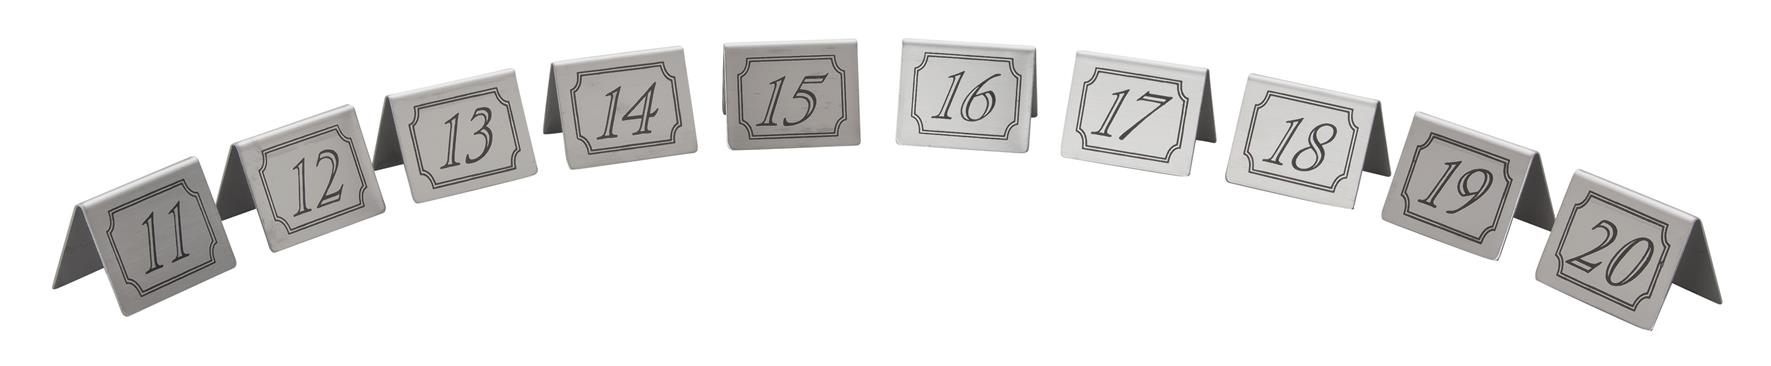 11-20 Stainless Steel Table Numbers (Each) 11-20, Stainless, Steel, Table, Numbers, Beaumont